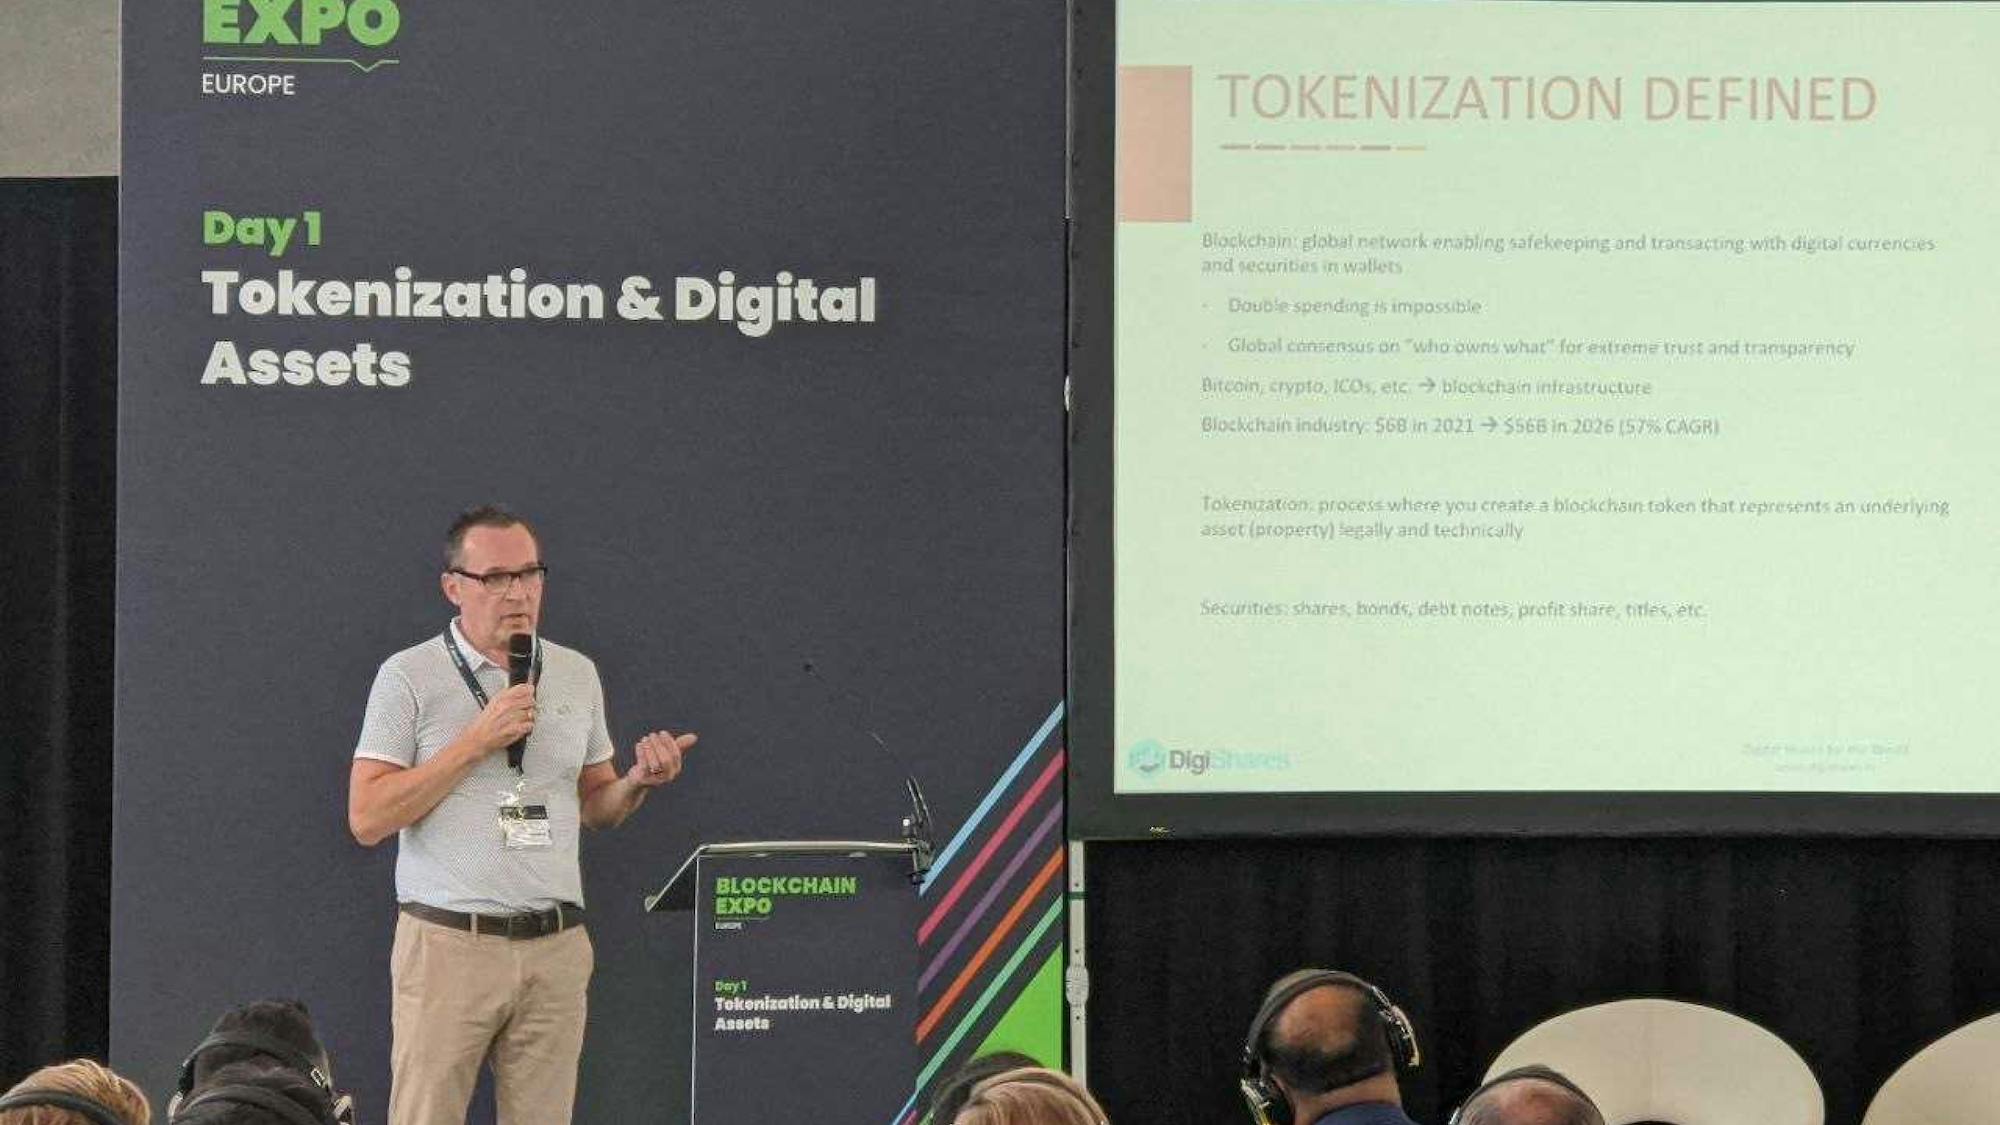 Claus Skaaning, Founder and CEO of Digishares, speaking at the Blockchain Expo in Europe